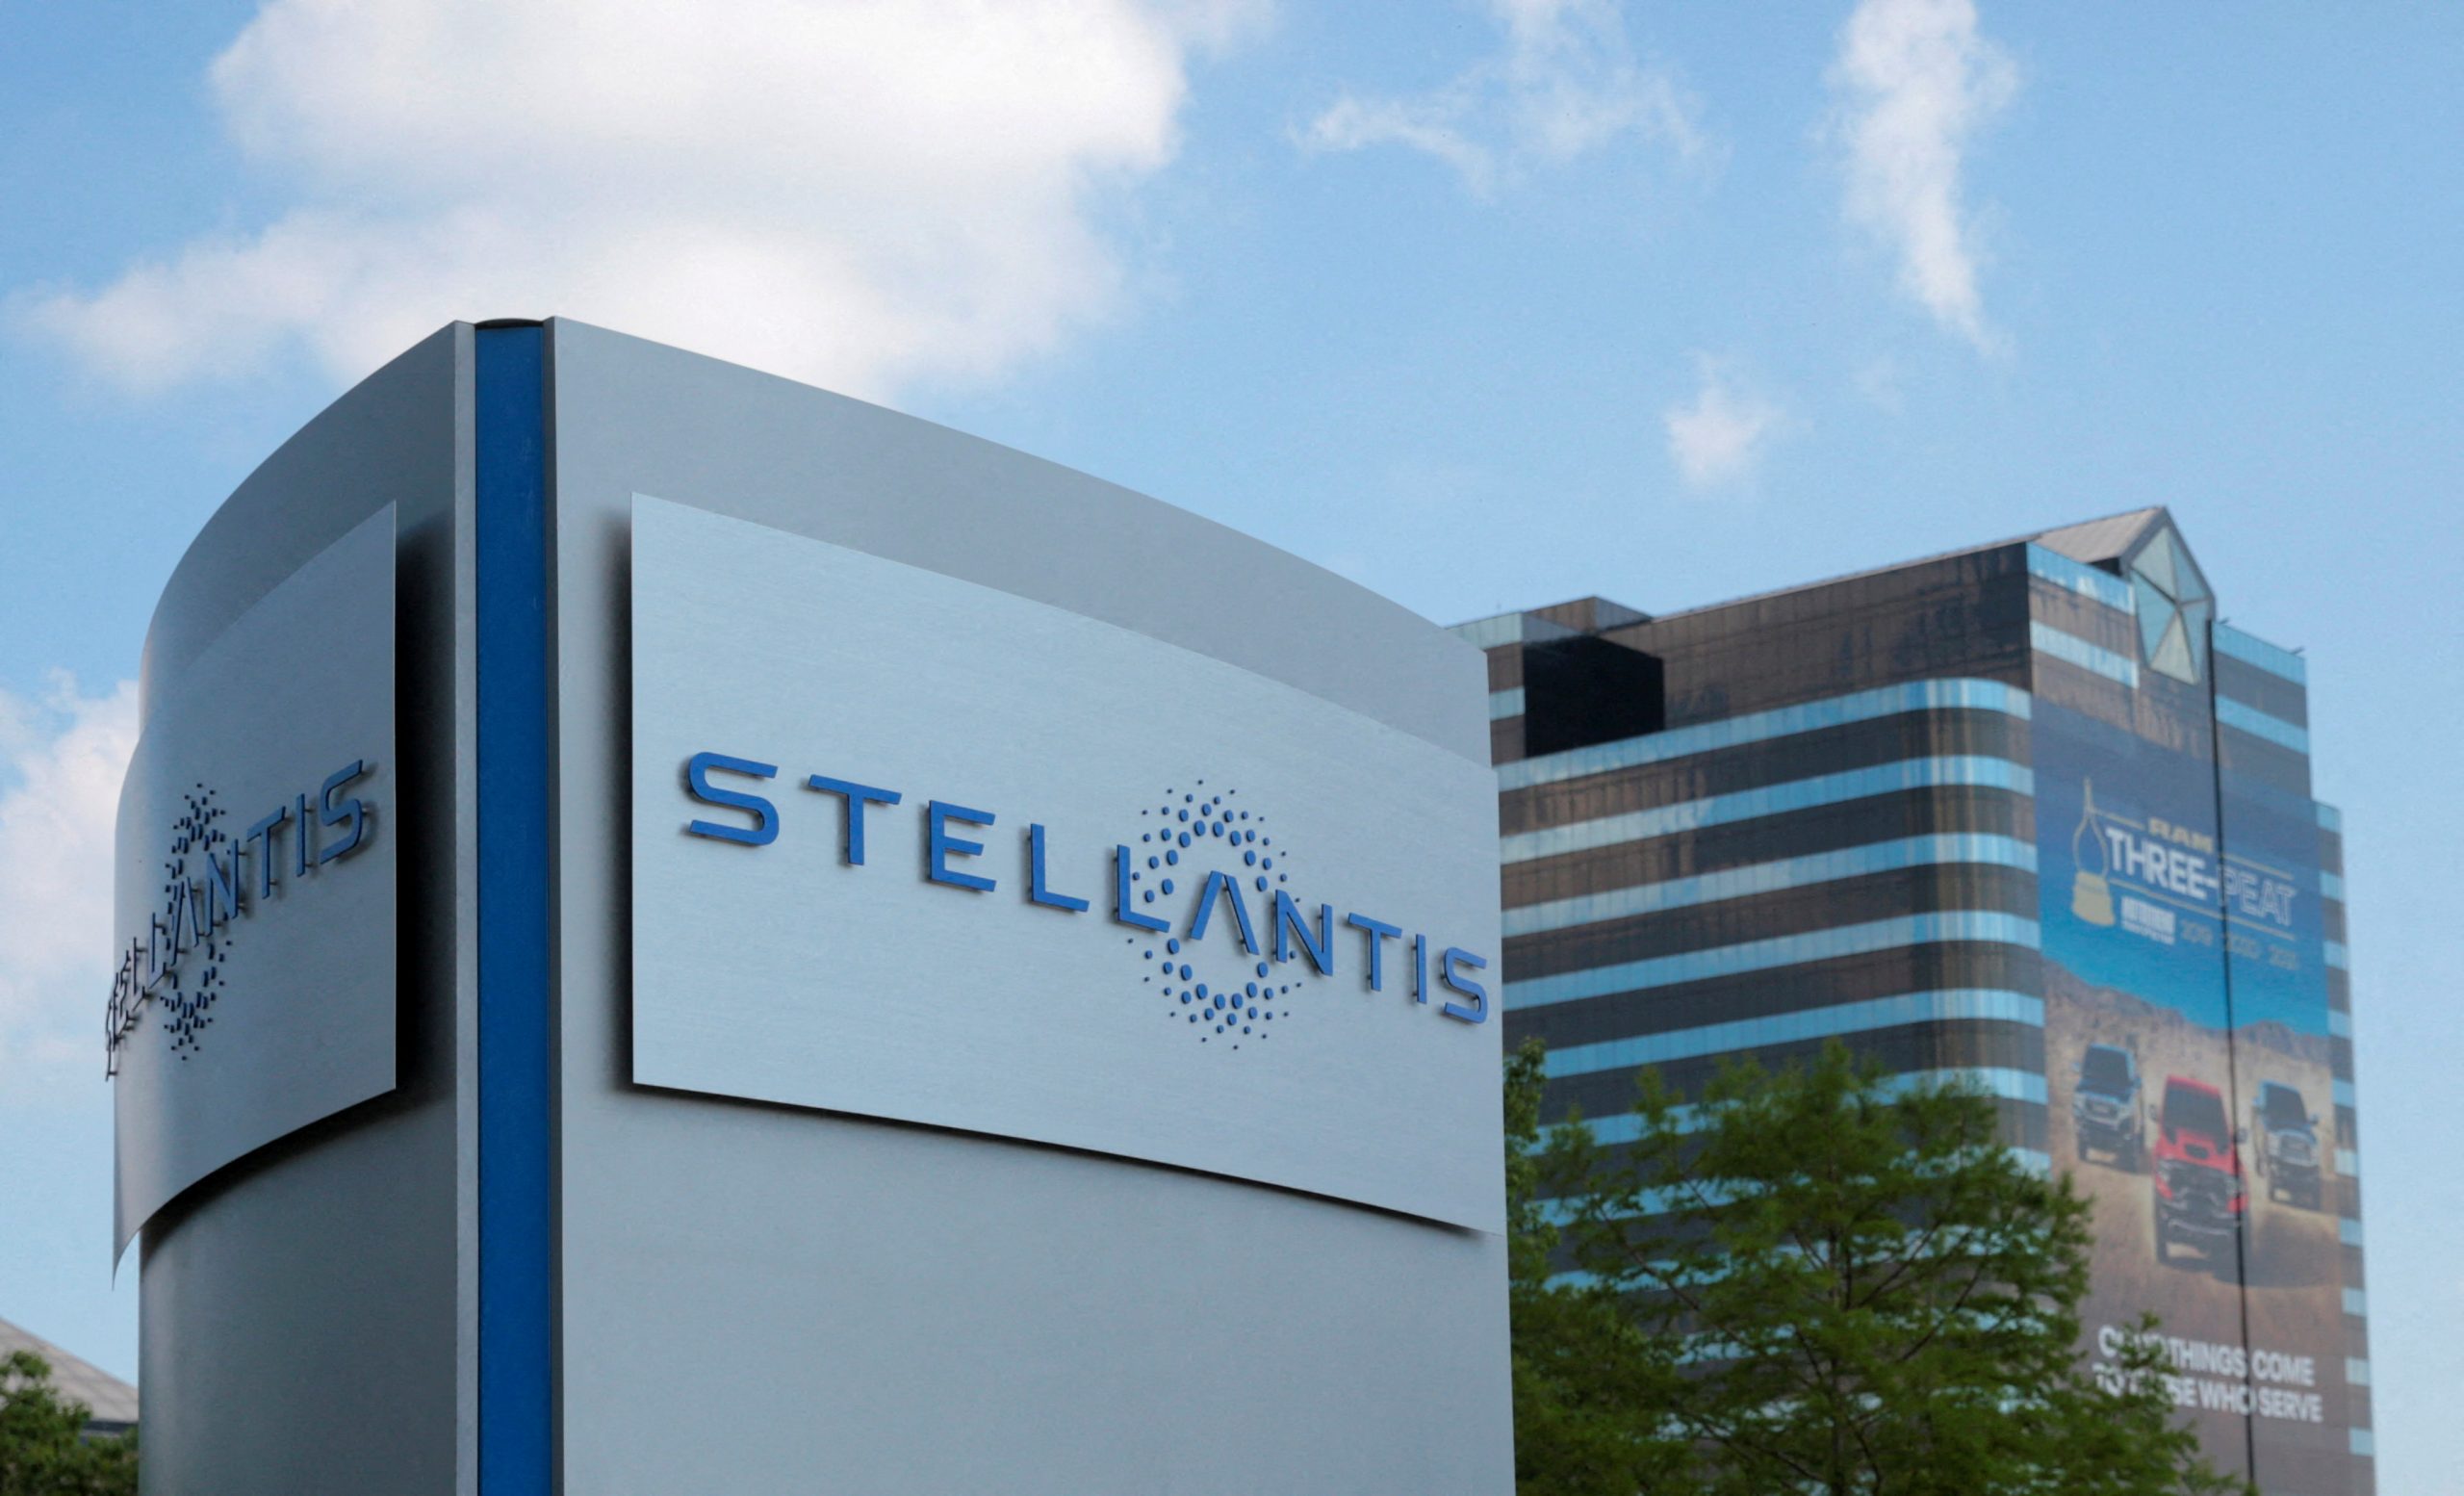 A $27,000 battery-electric vehicle (BEV) from Stellantis is scheduled to be unveiled in 2024, the same time as other OEM releases.